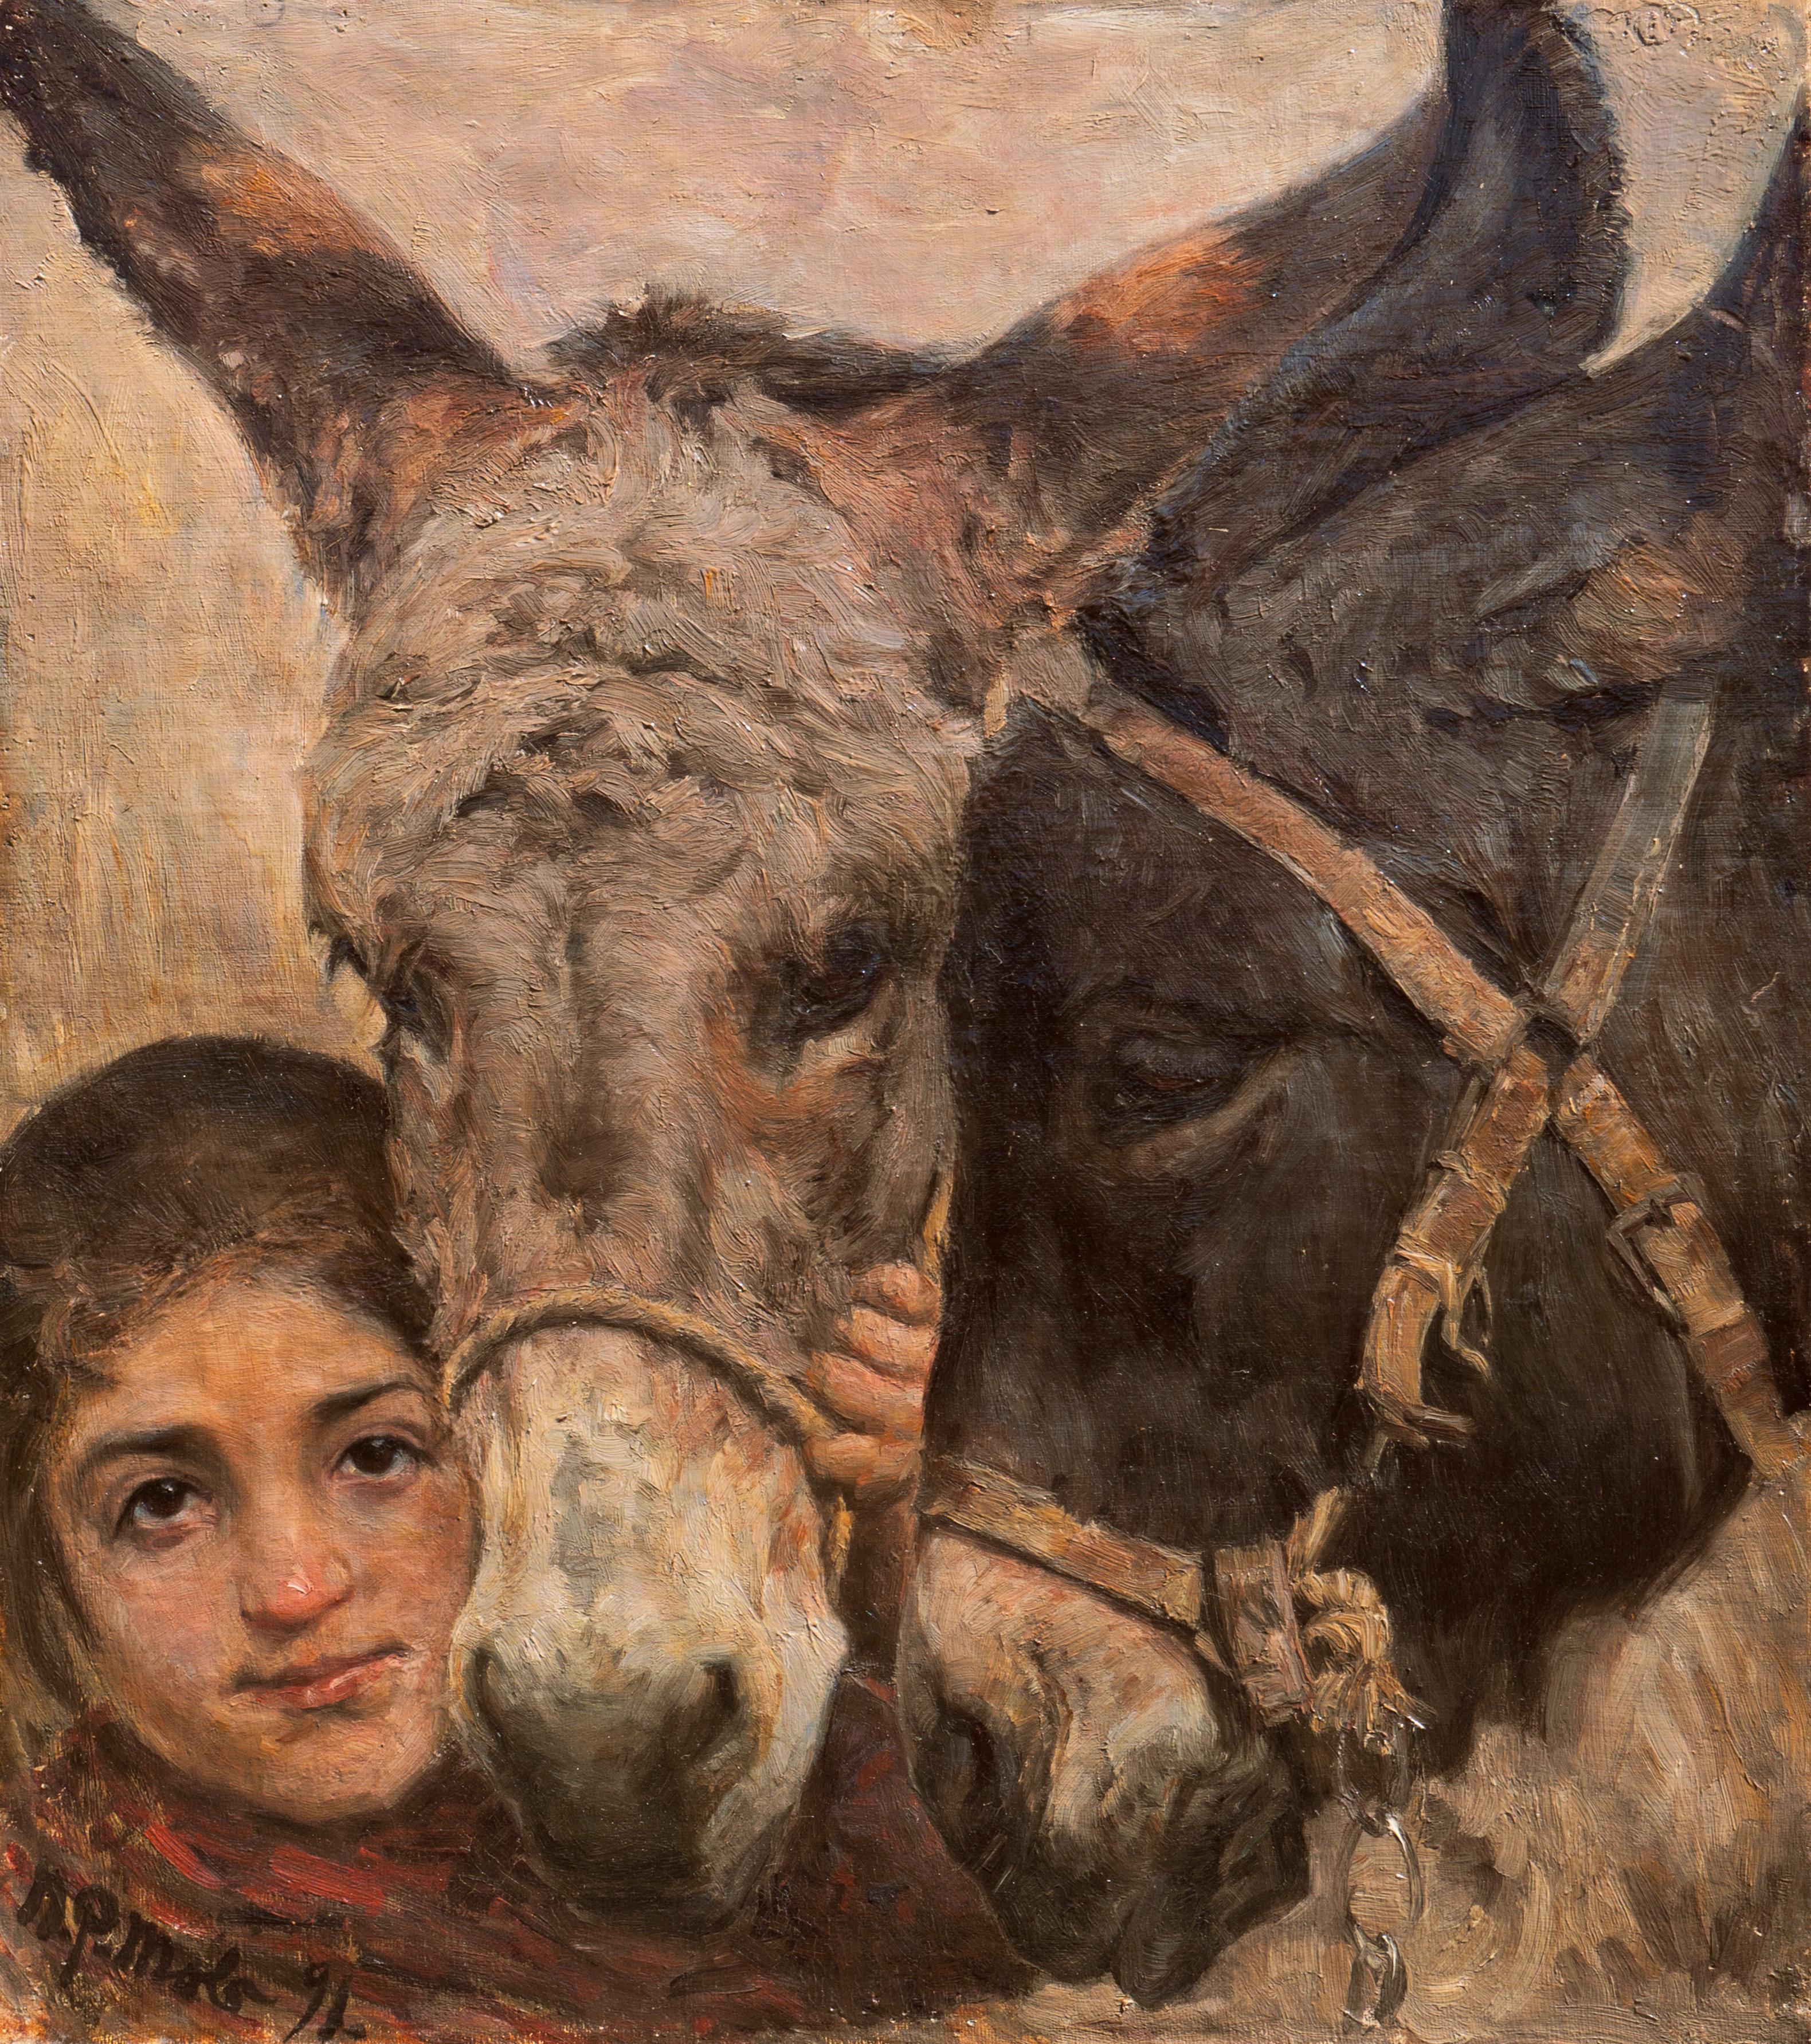 Niels Pederson Mols Animal Painting - Old Friends, Gentle 19th century oil of a Farm Girl with Two Donkeys